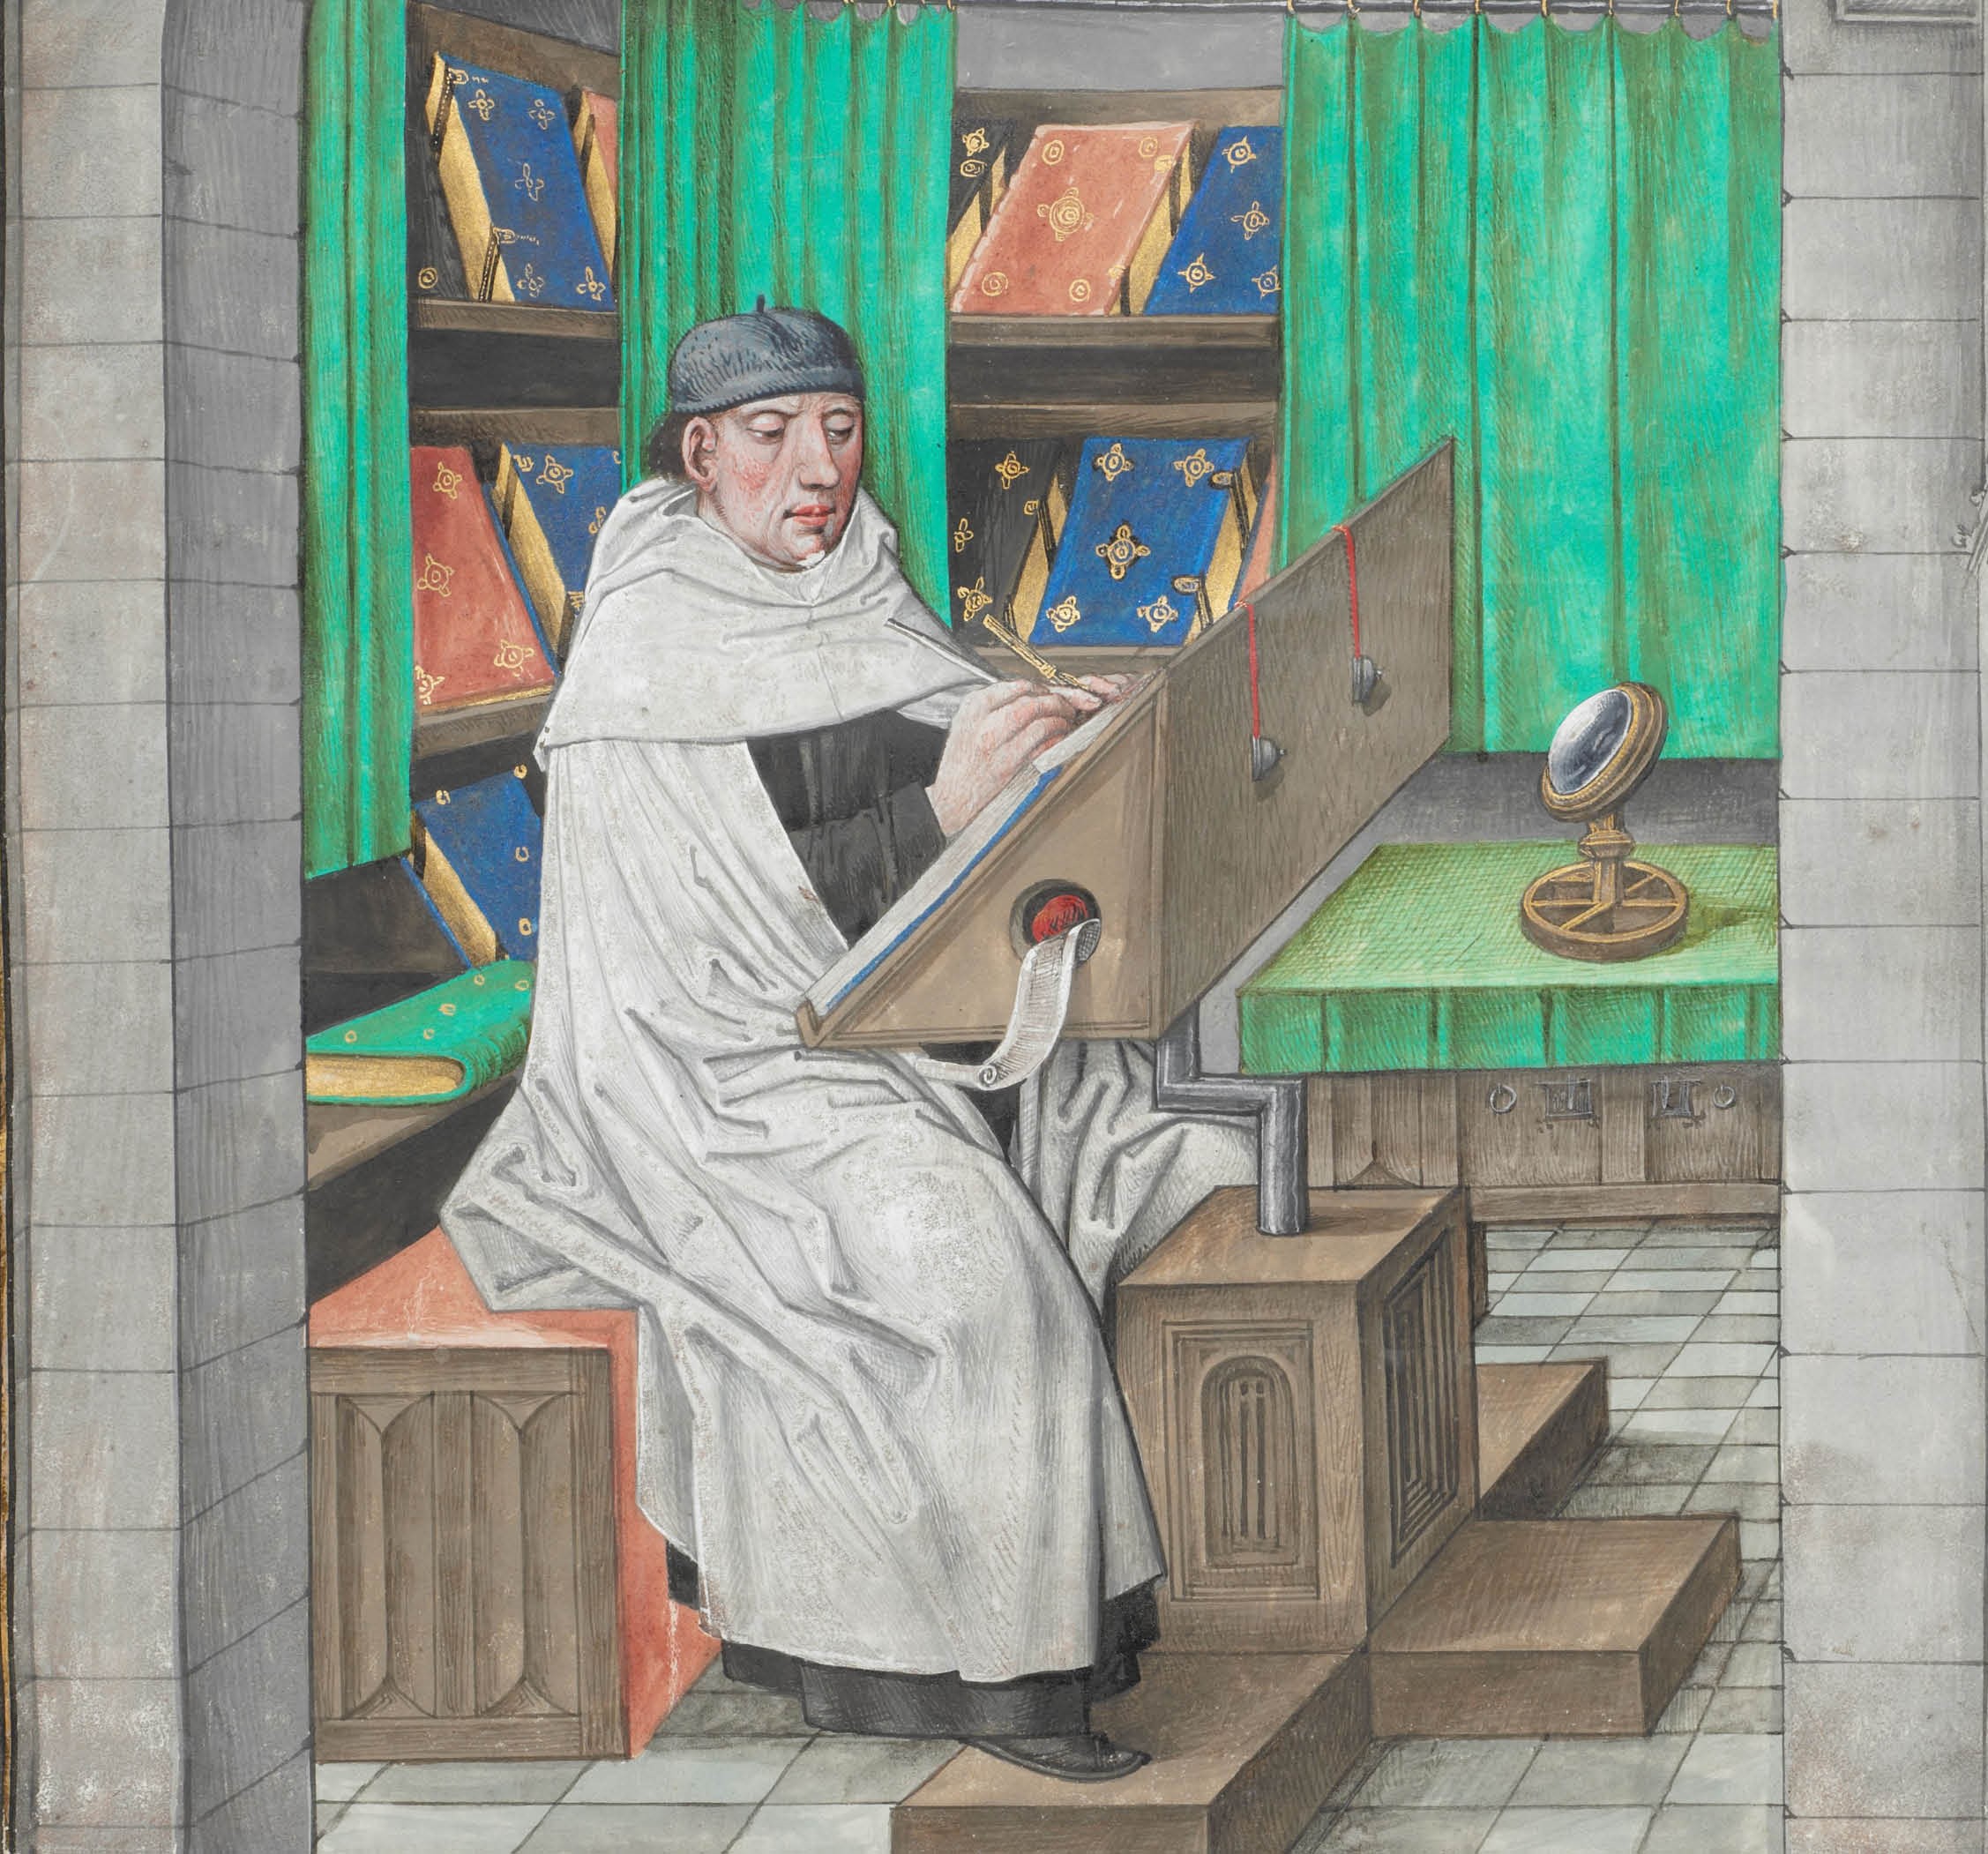 The image shows a medieval scribe at work by his pulpit.